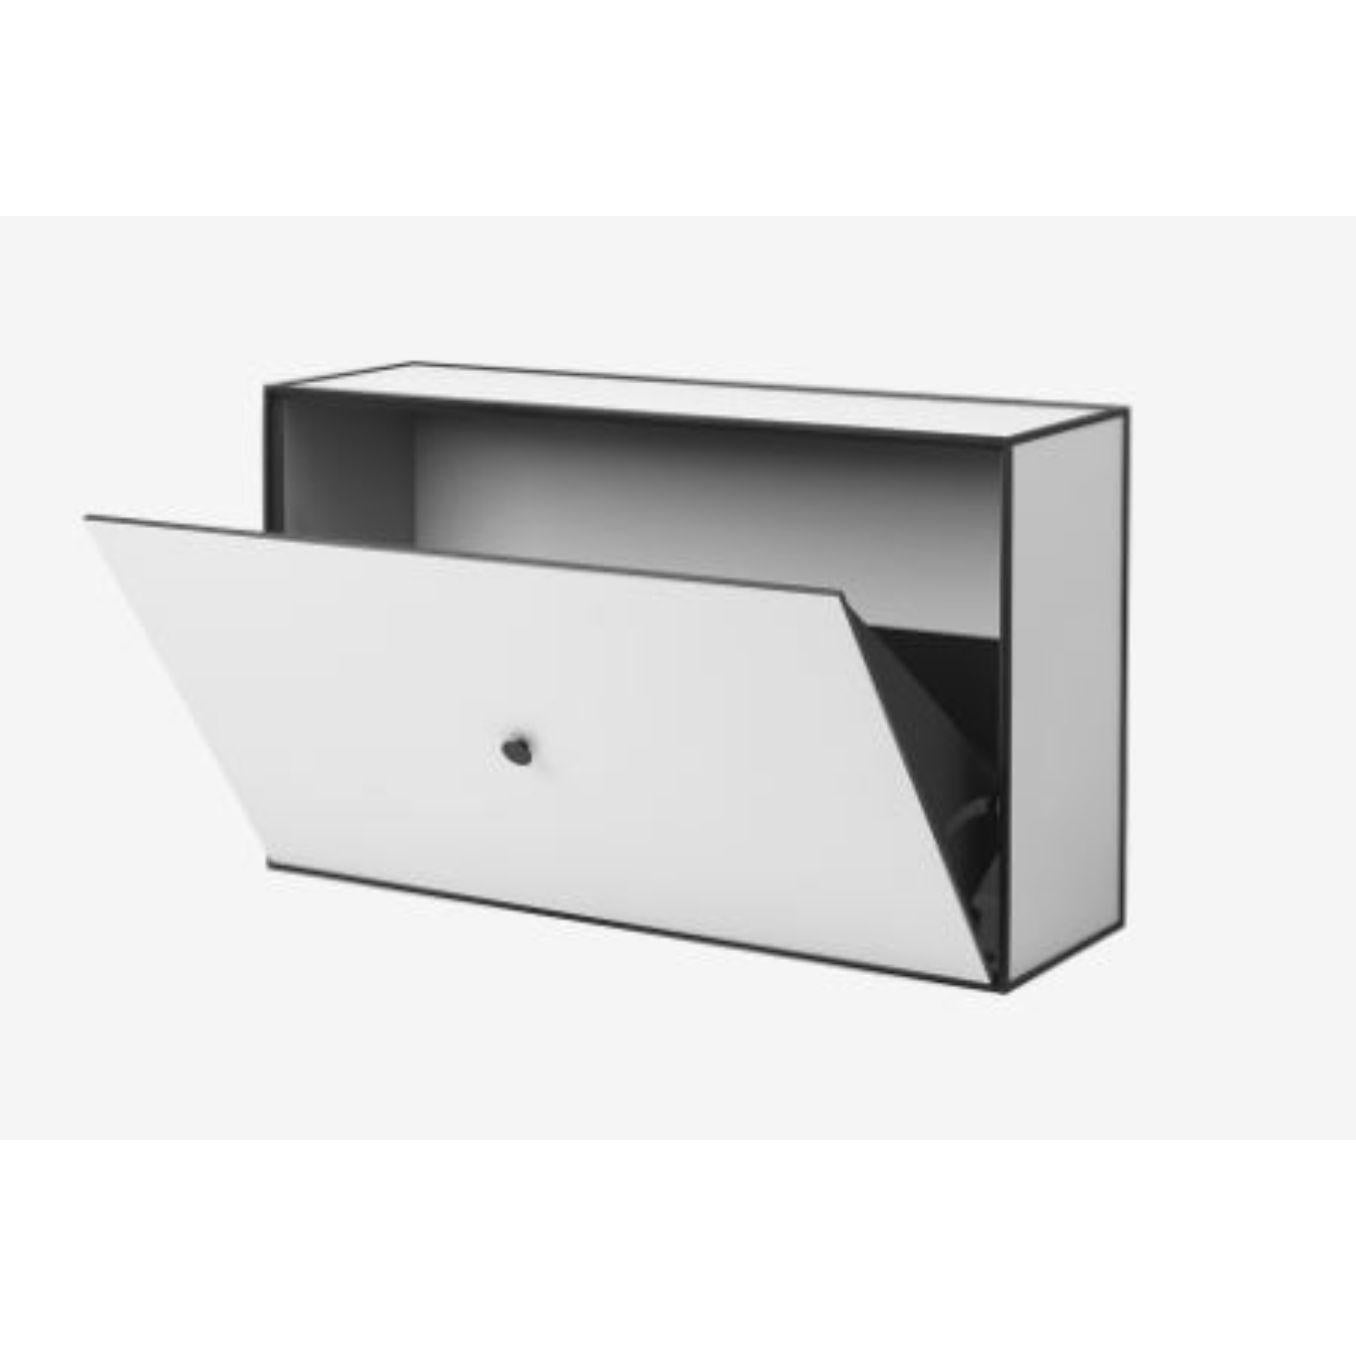 Light grey frame shoe cabinet by Lassen
Dimensions: D 70 x W 21 x H 42 cm 
Materials: Finér, Melamin, Melamine, Metal, Veneer
Also available in different colors and dimensions. 
Weight: 20 Kg

By Lassen is a Danish design brand focused on